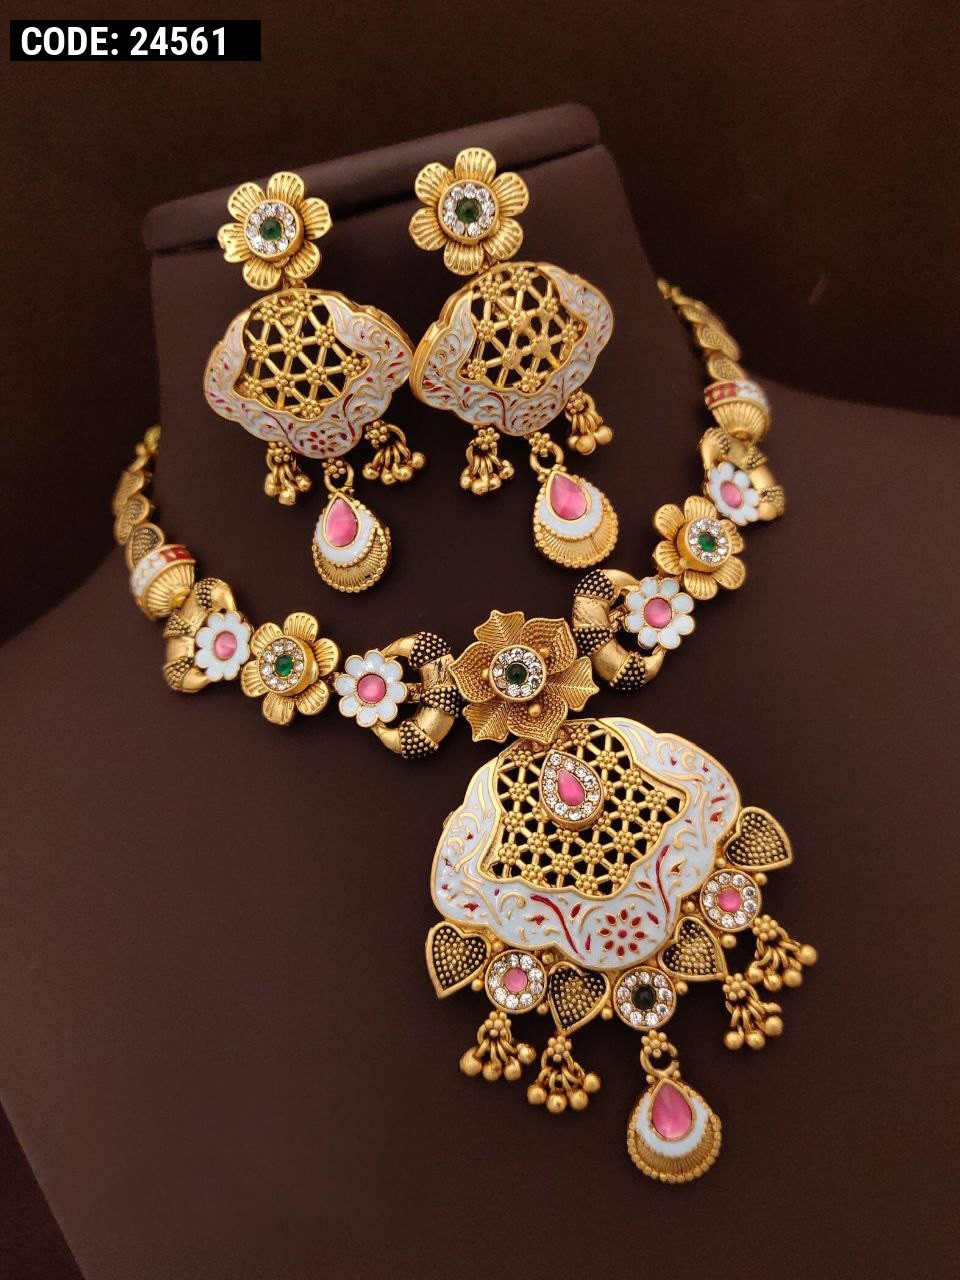 Stylists' reveal secrets of Indian bridal fashion - How to Match your Bridal  Necklace to your Neckline - Witty Vows